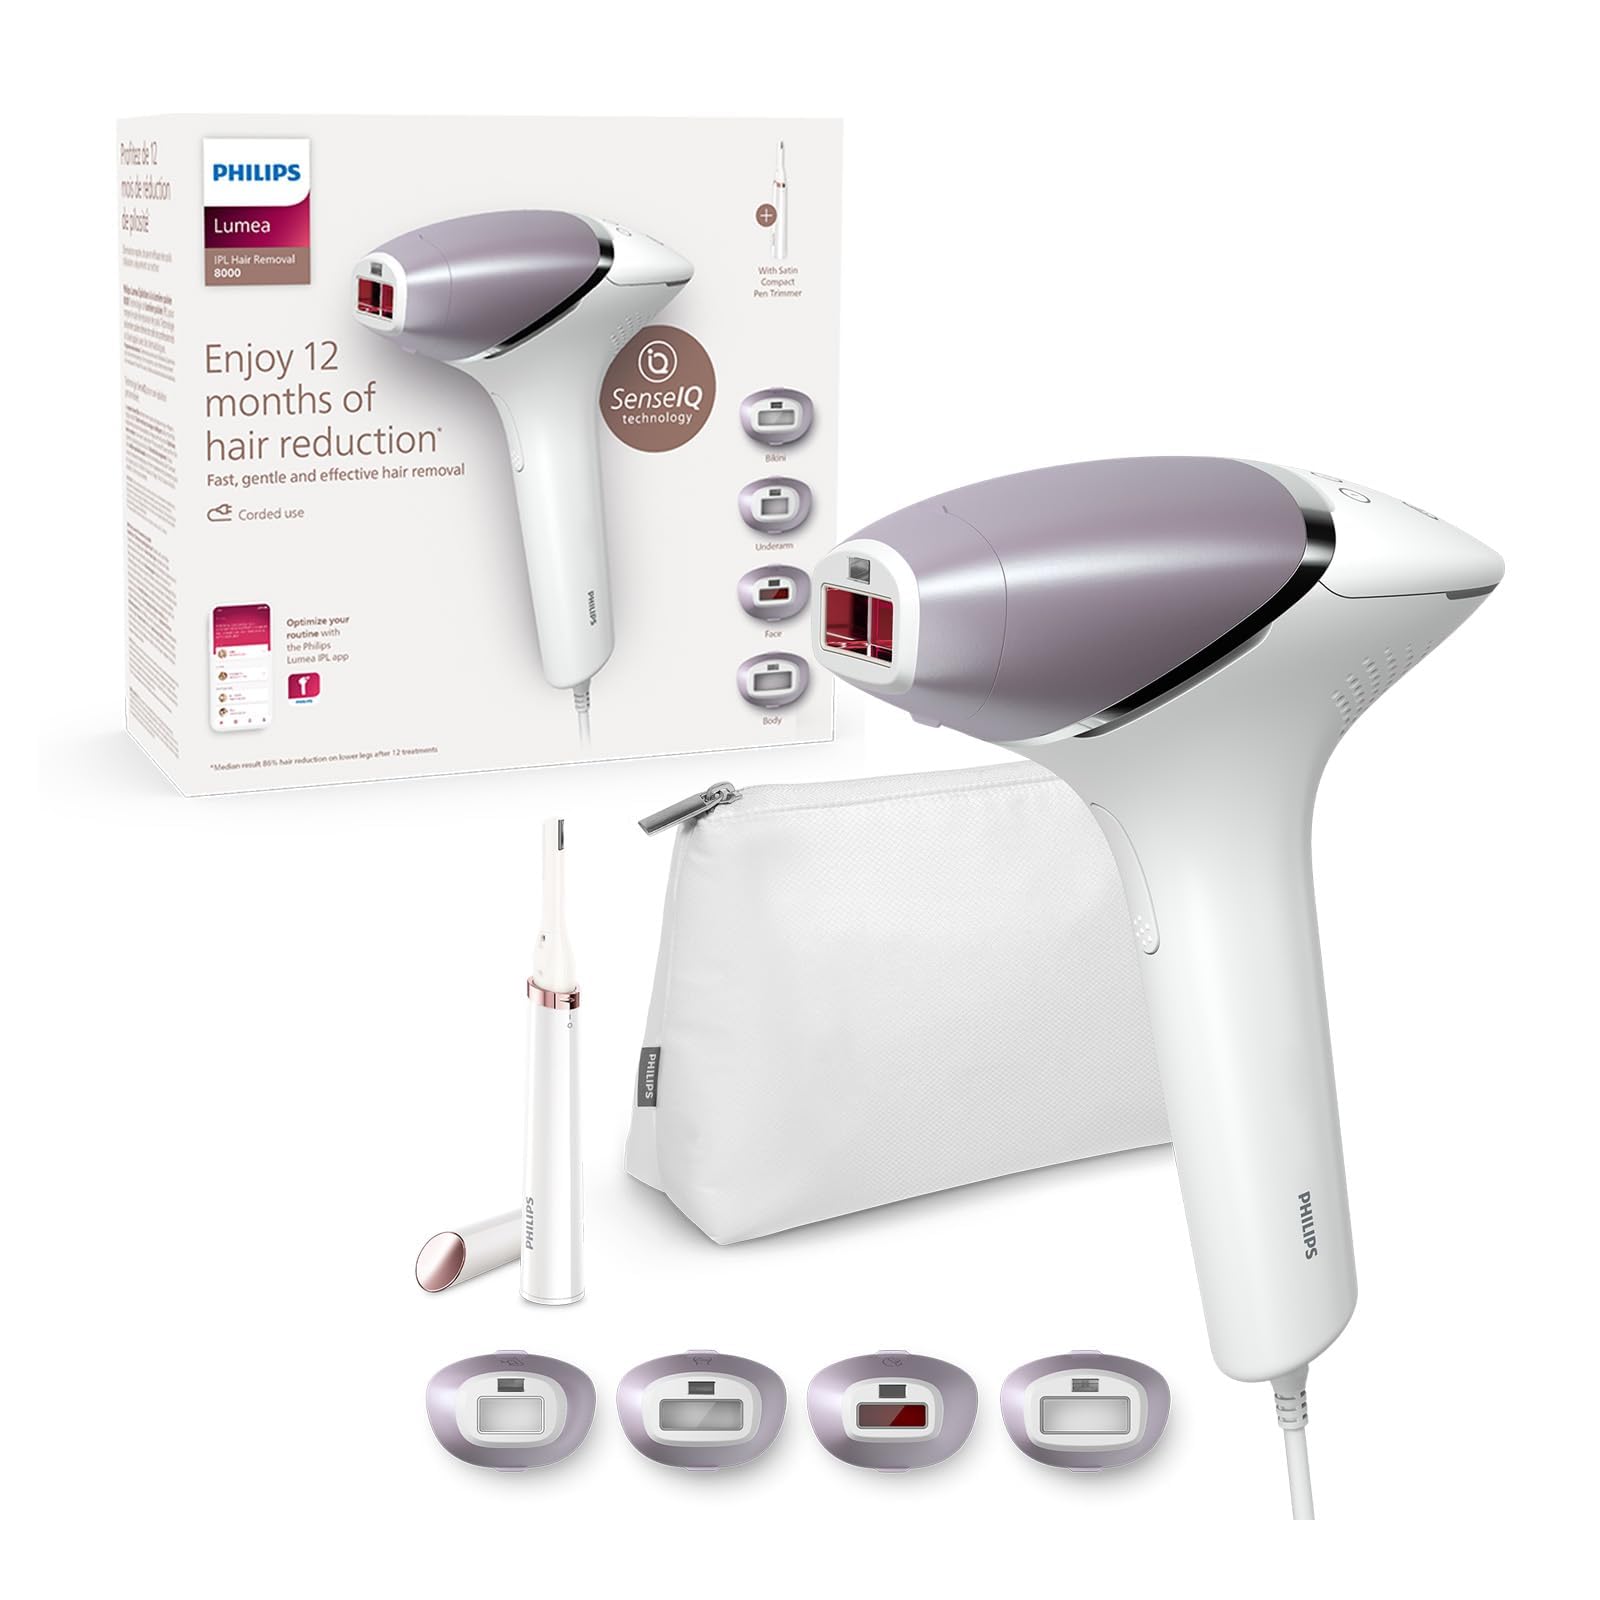 PHILIPS Lumea Prestige IPL Hair Removal Device with SmartSkin Sensor, 4 Intelligent Attachments for Underarms, Bikini, Body and Face Plus Satin Compact Pen Trimmer, BRI949/00, White, (Pack of 1)